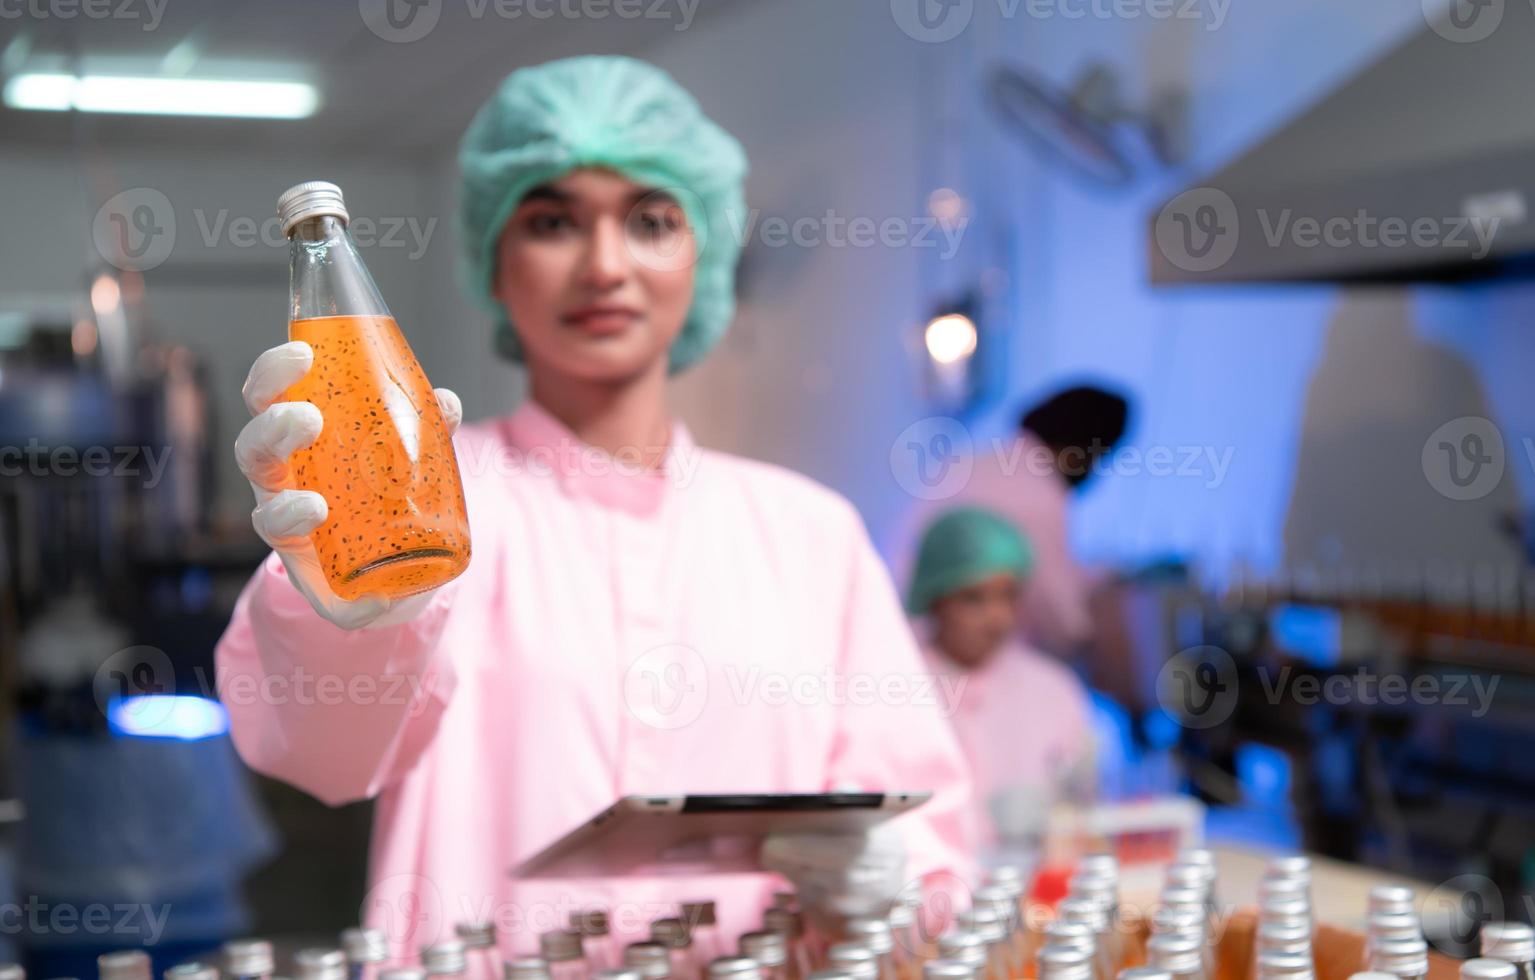 Product quality control staff at the fruit juice production line Perform product quality checks To ensure that the products produced are of good quality photo